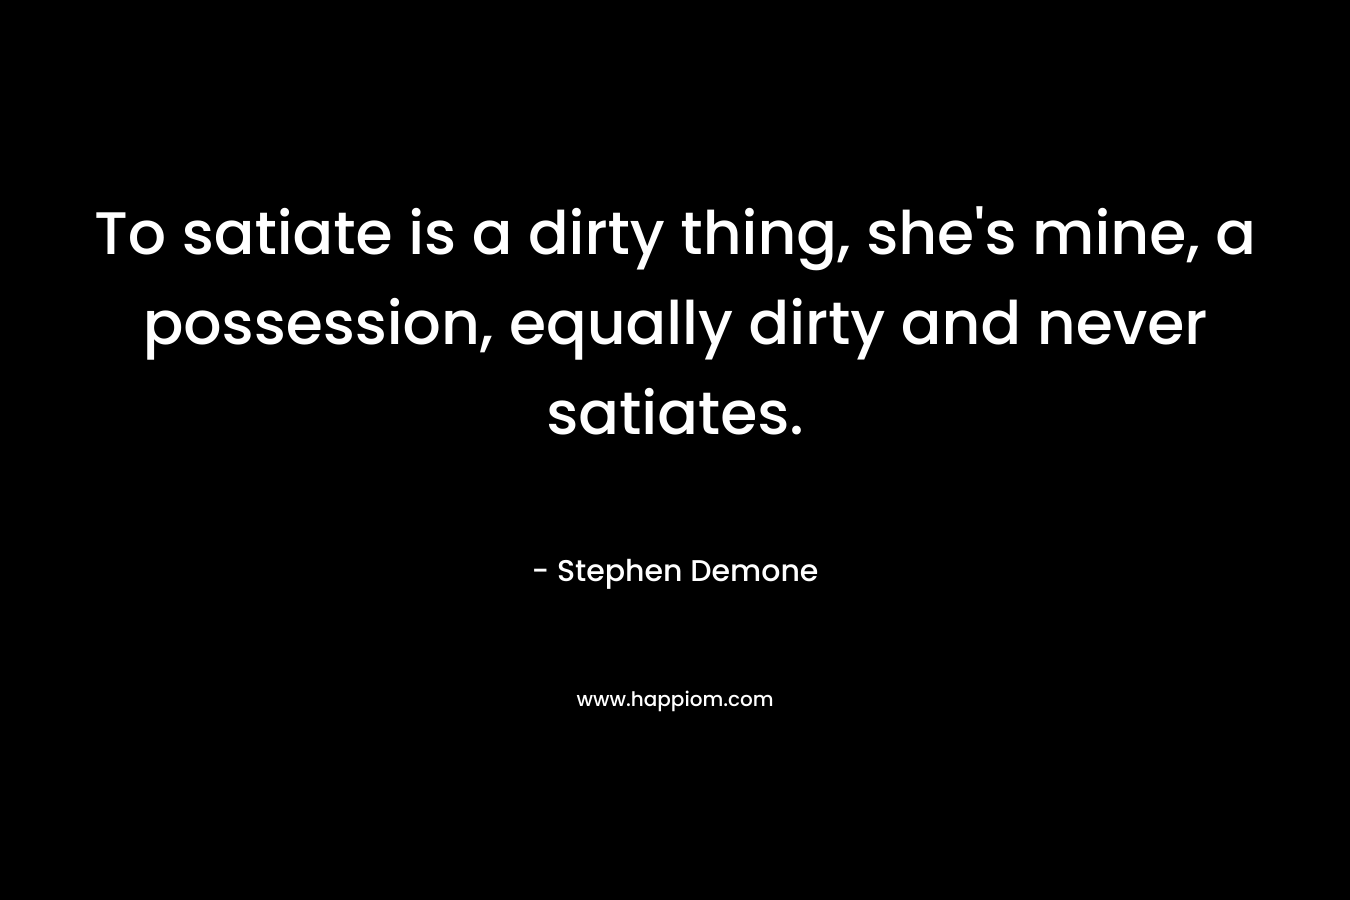 To satiate is a dirty thing, she's mine, a possession, equally dirty and never satiates.